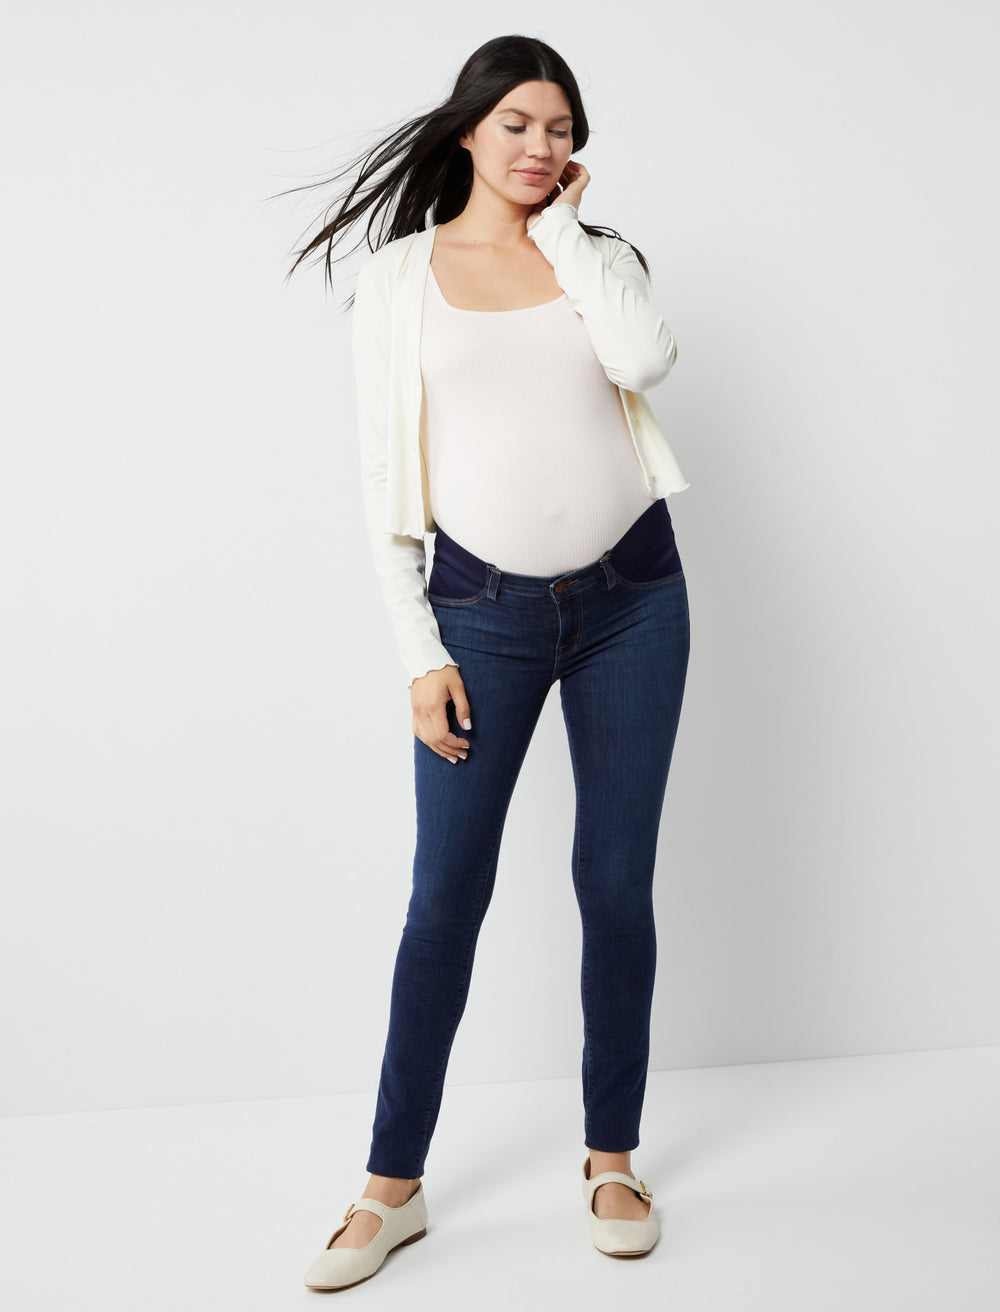 13 Best Maternity Pants For Work + Casual Wear [Petite, Tall, Plus Size  Options!] - The Confused Millennial